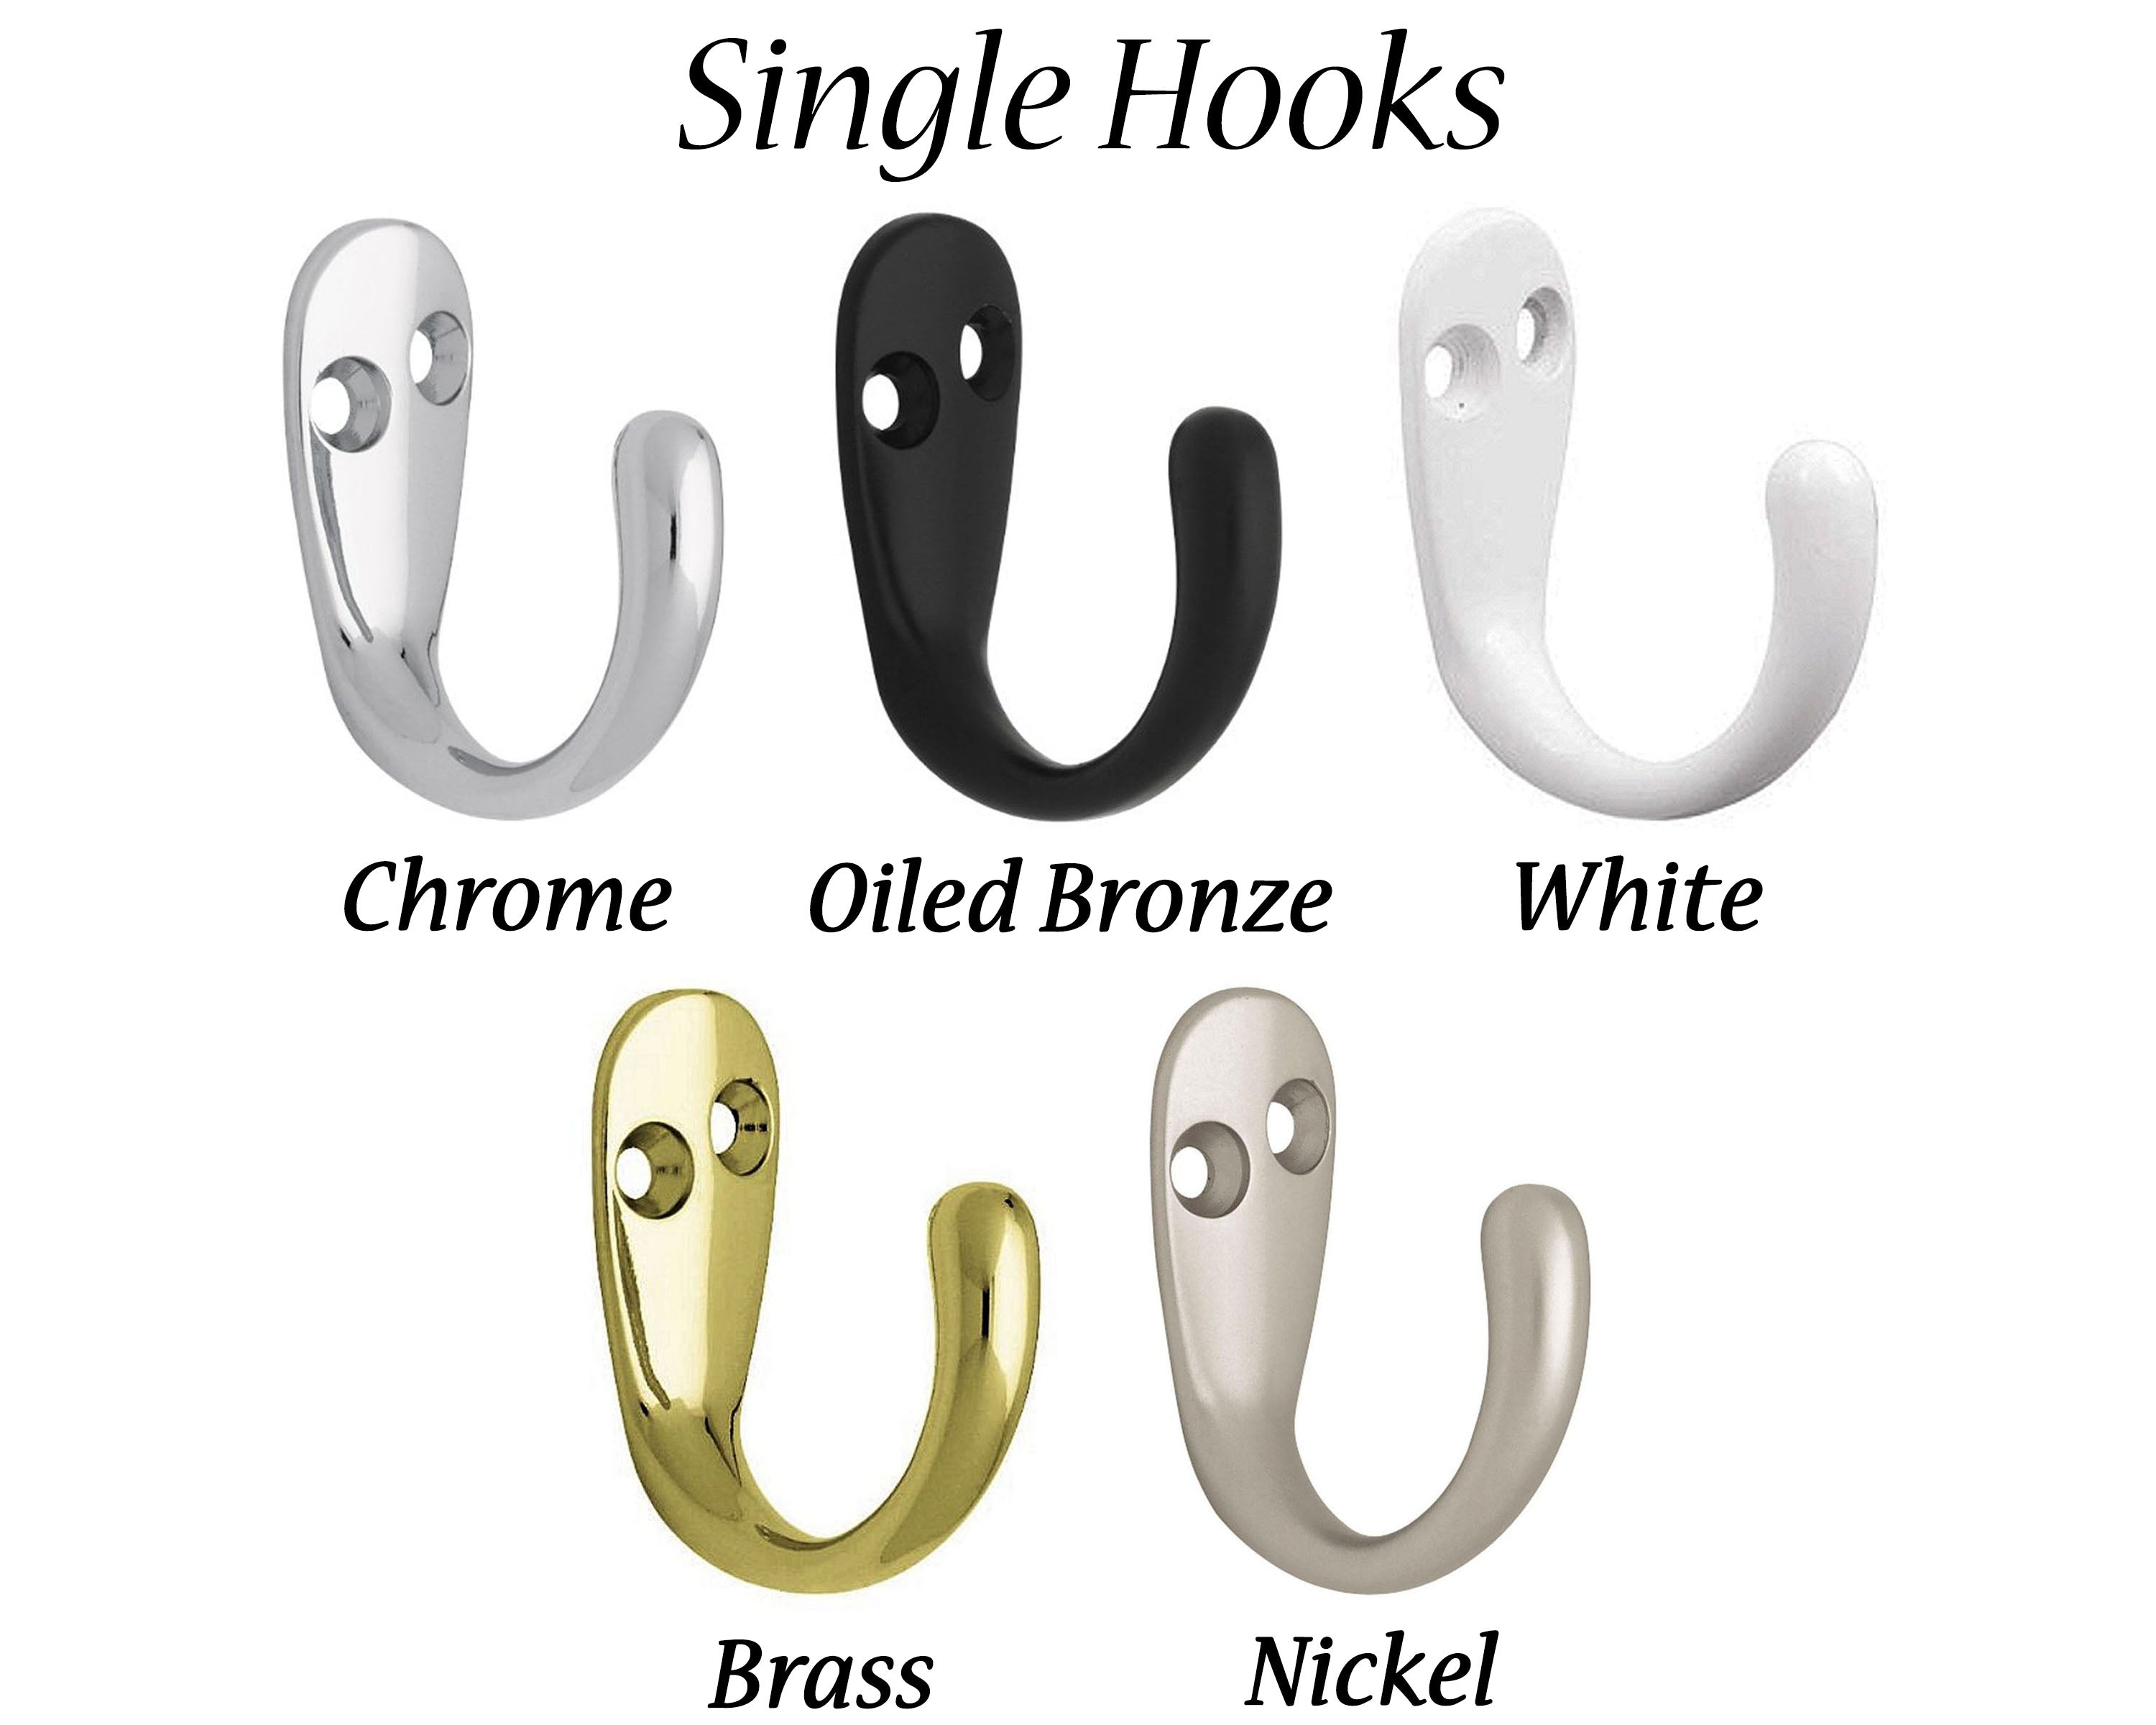 Single Hook Finishes Nickel, Oiled Bronze, White, Brass and Chrome